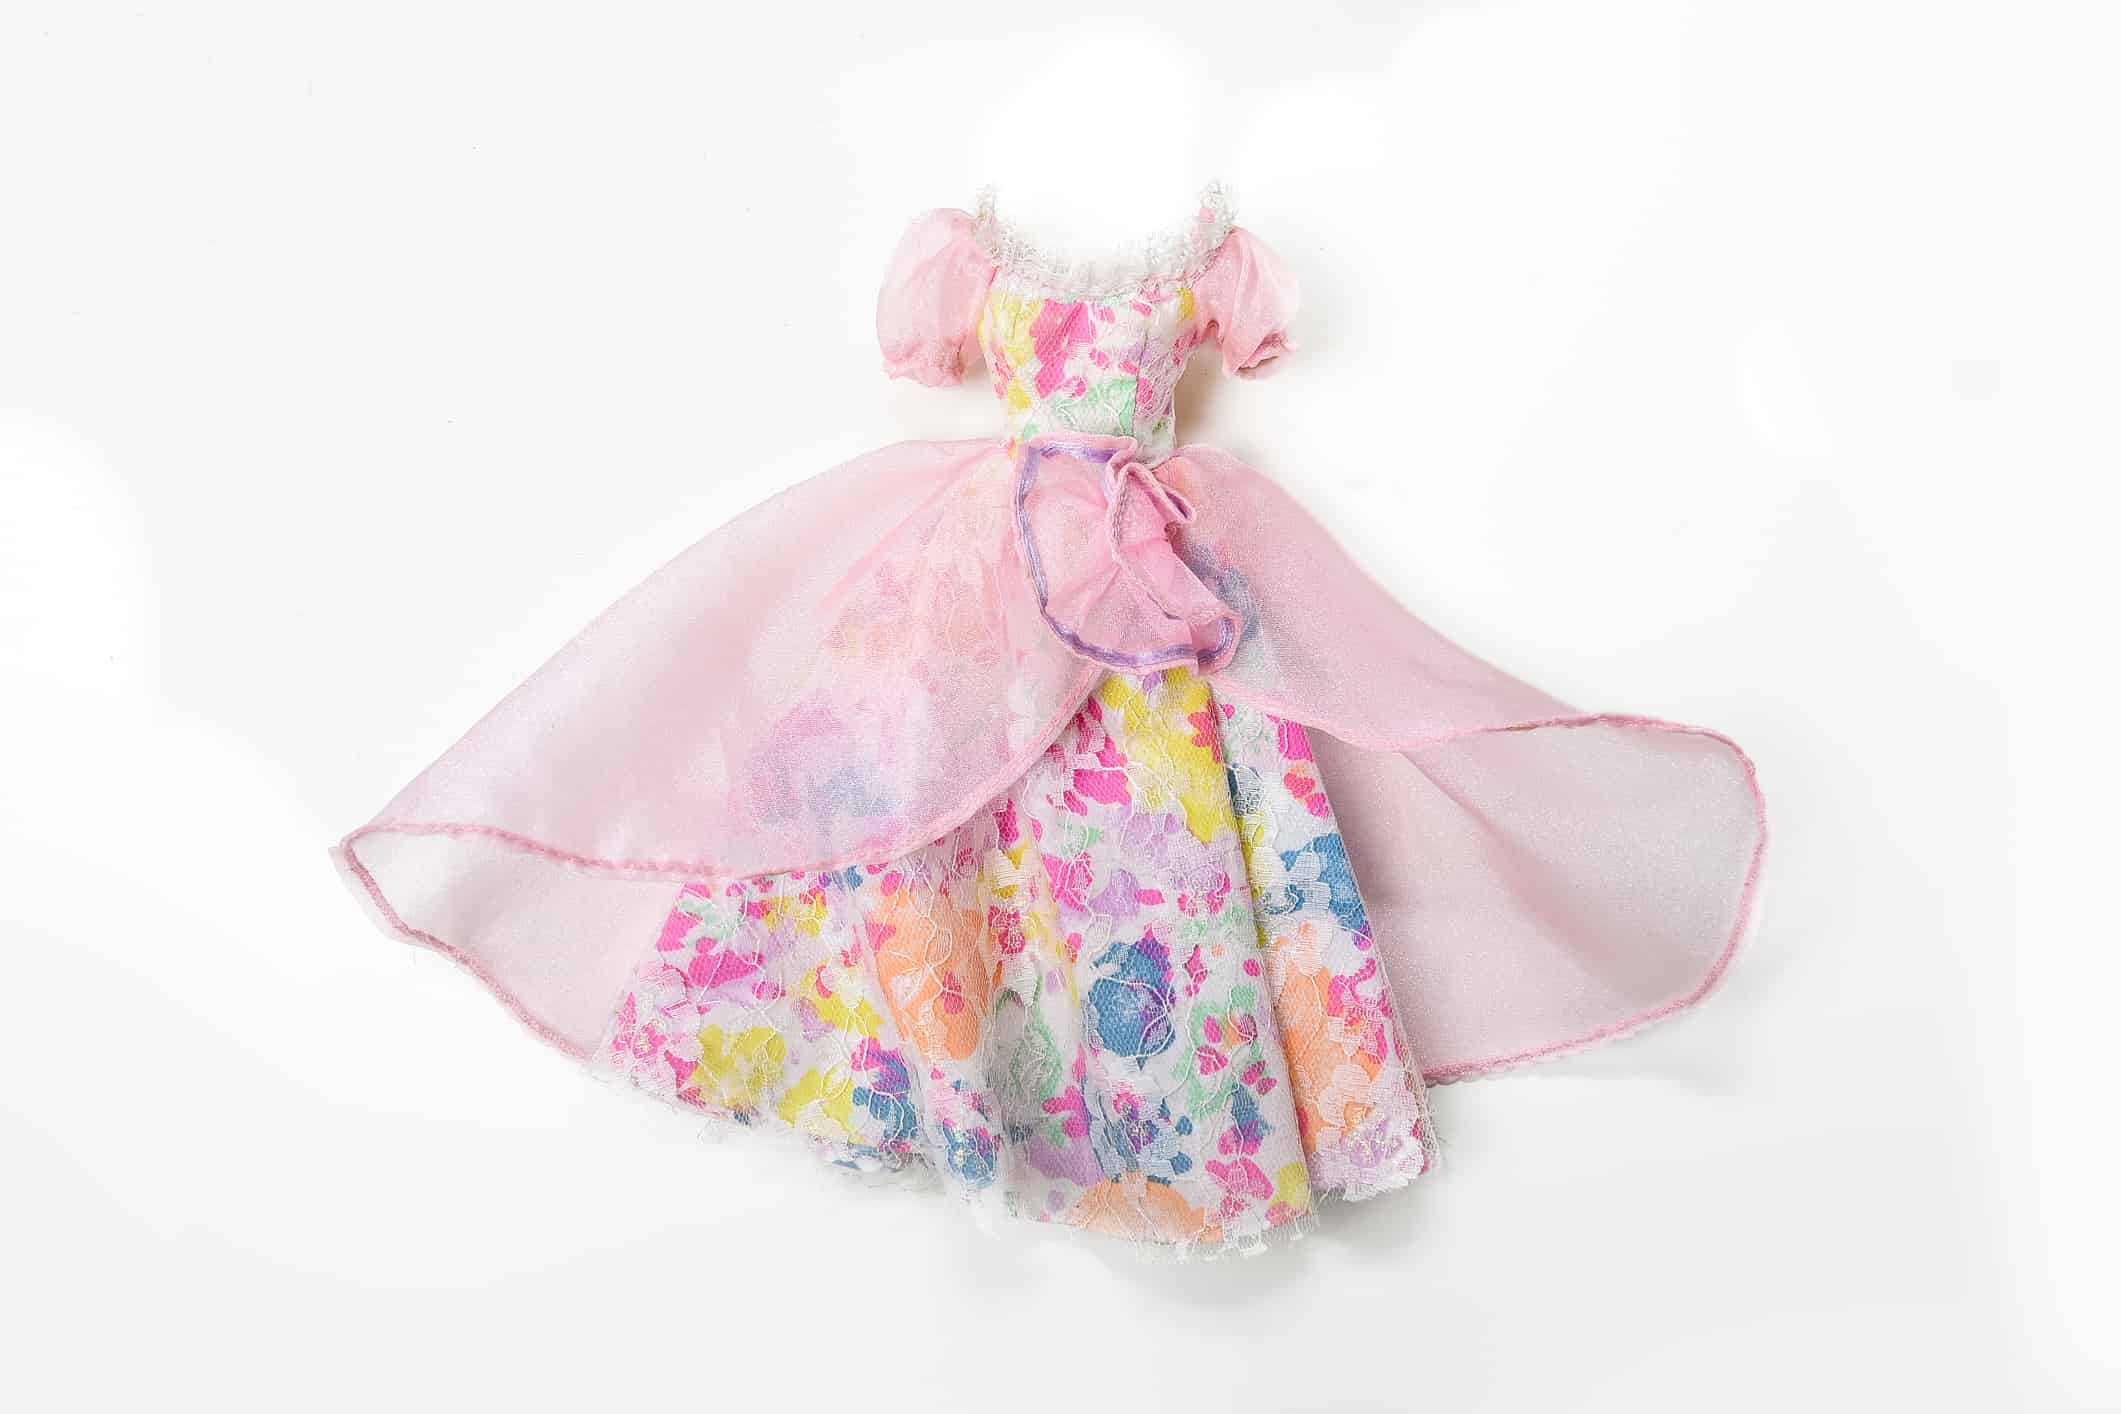 Buy BARBIE BIRTHDAY OUTFIT Online In India - Etsy India